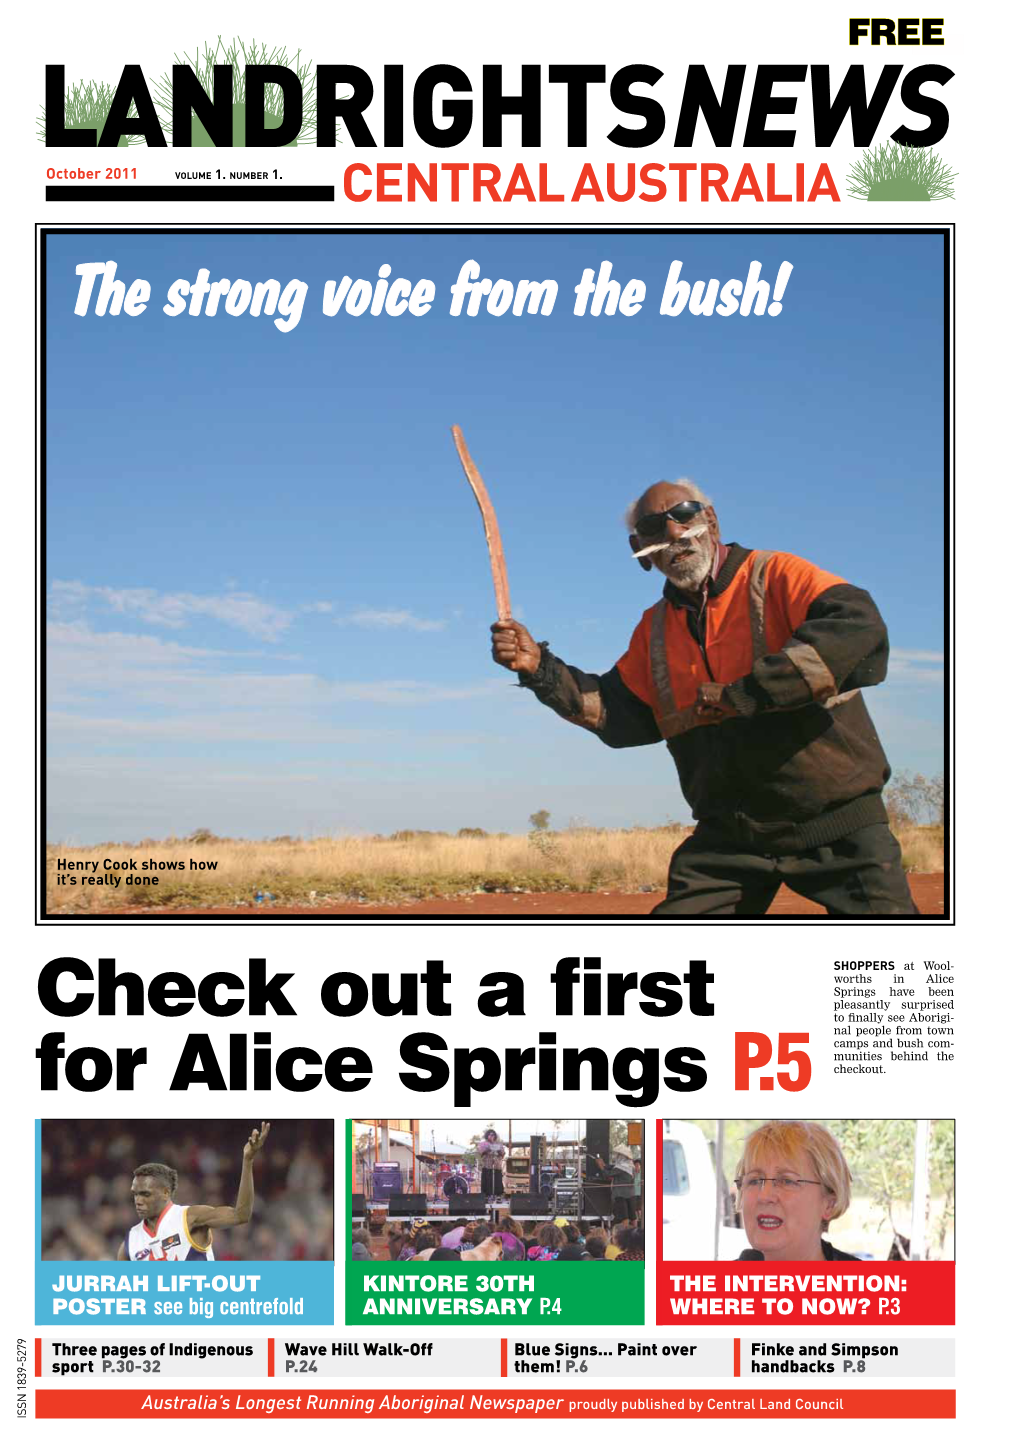 Check out a First for Alice Springs